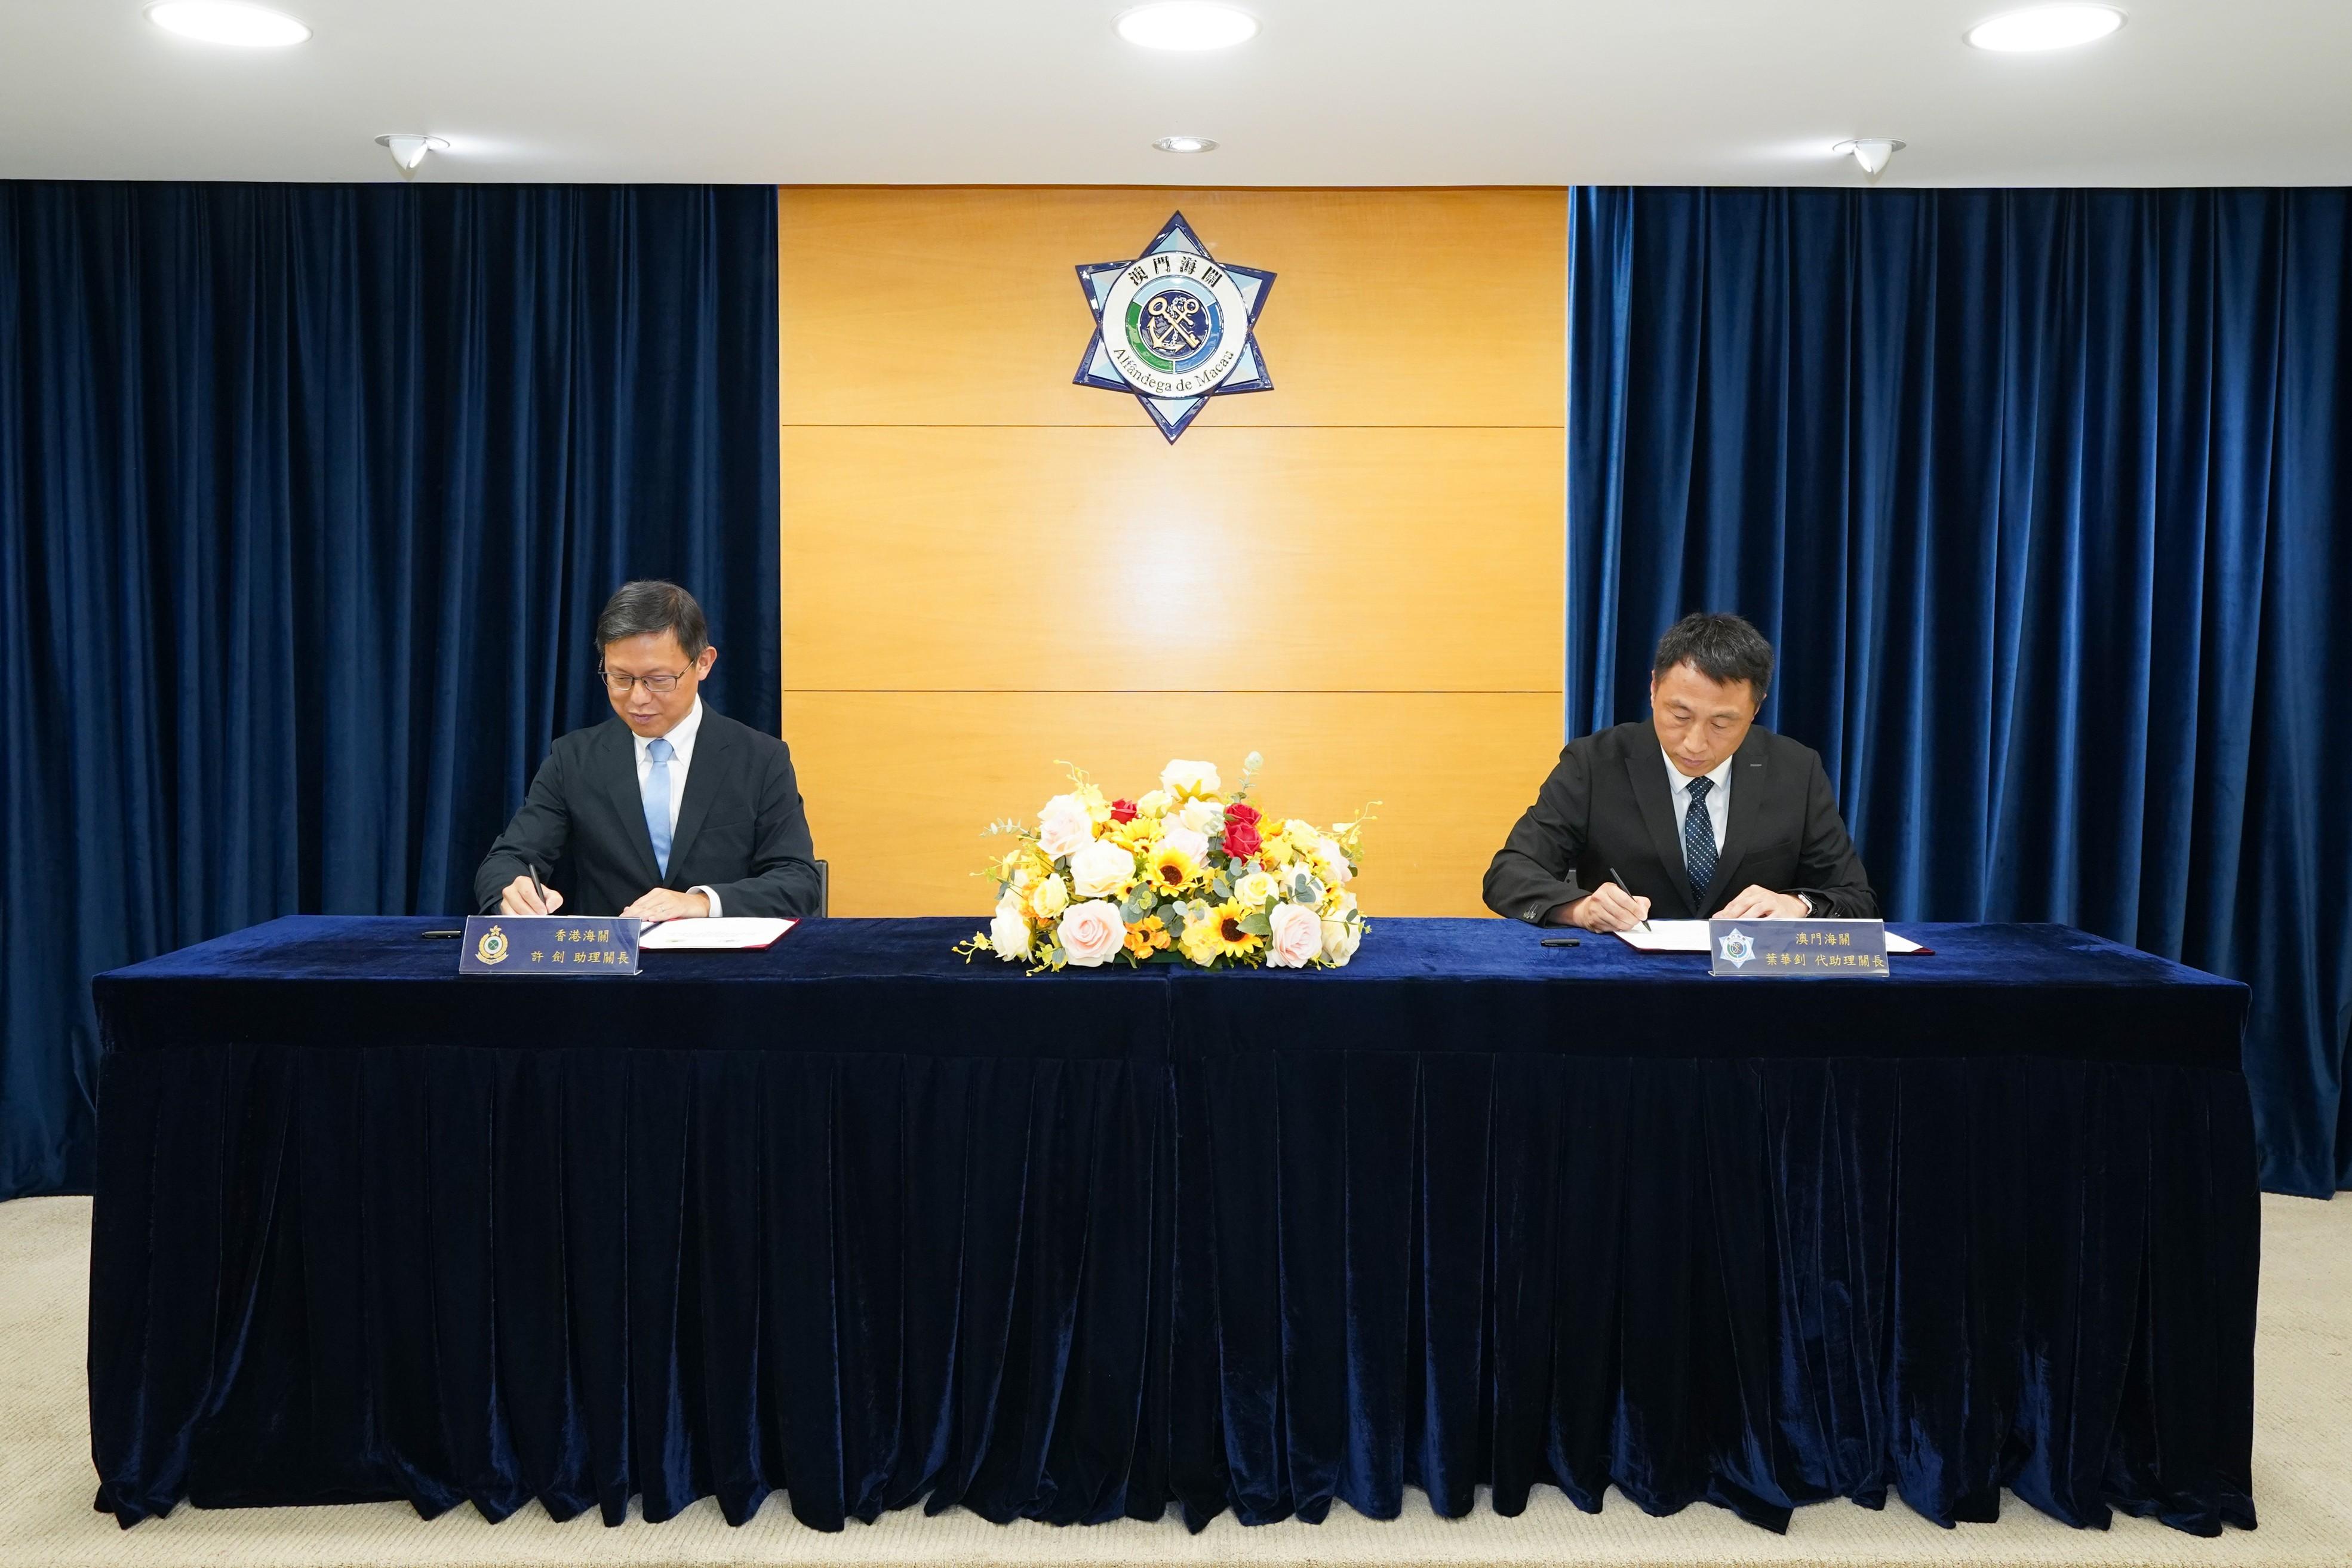 The Assistant Commissioner of Customs and Excise (Excise and Strategic Support), Mr Rudy Hui (left), today (September 14) in Macao signed the Authorized Economic Operator (AEO) Mutual Recognition Arrangement Action Plan with the Acting Assistant Director-General of Macao Customs Service, Mr Ip Va-chio (right), marking the commencement of the formal negotiation stage for mutual recognition of the AEO of both sides.
